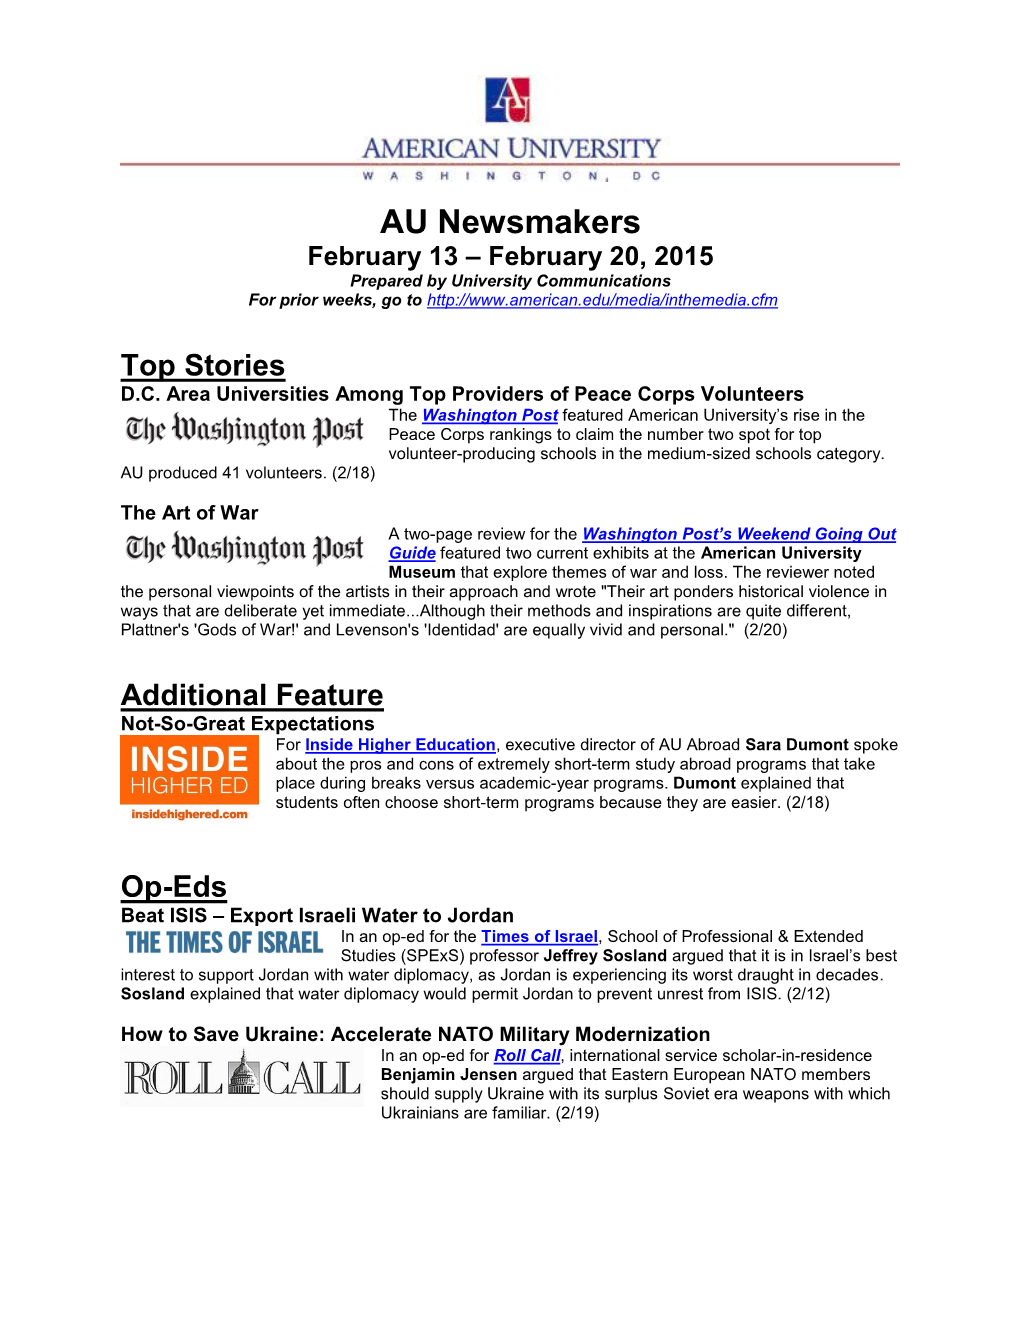 AU Newsmakers February 13 – February 20, 2015 Prepared by University Communications for Prior Weeks, Go To